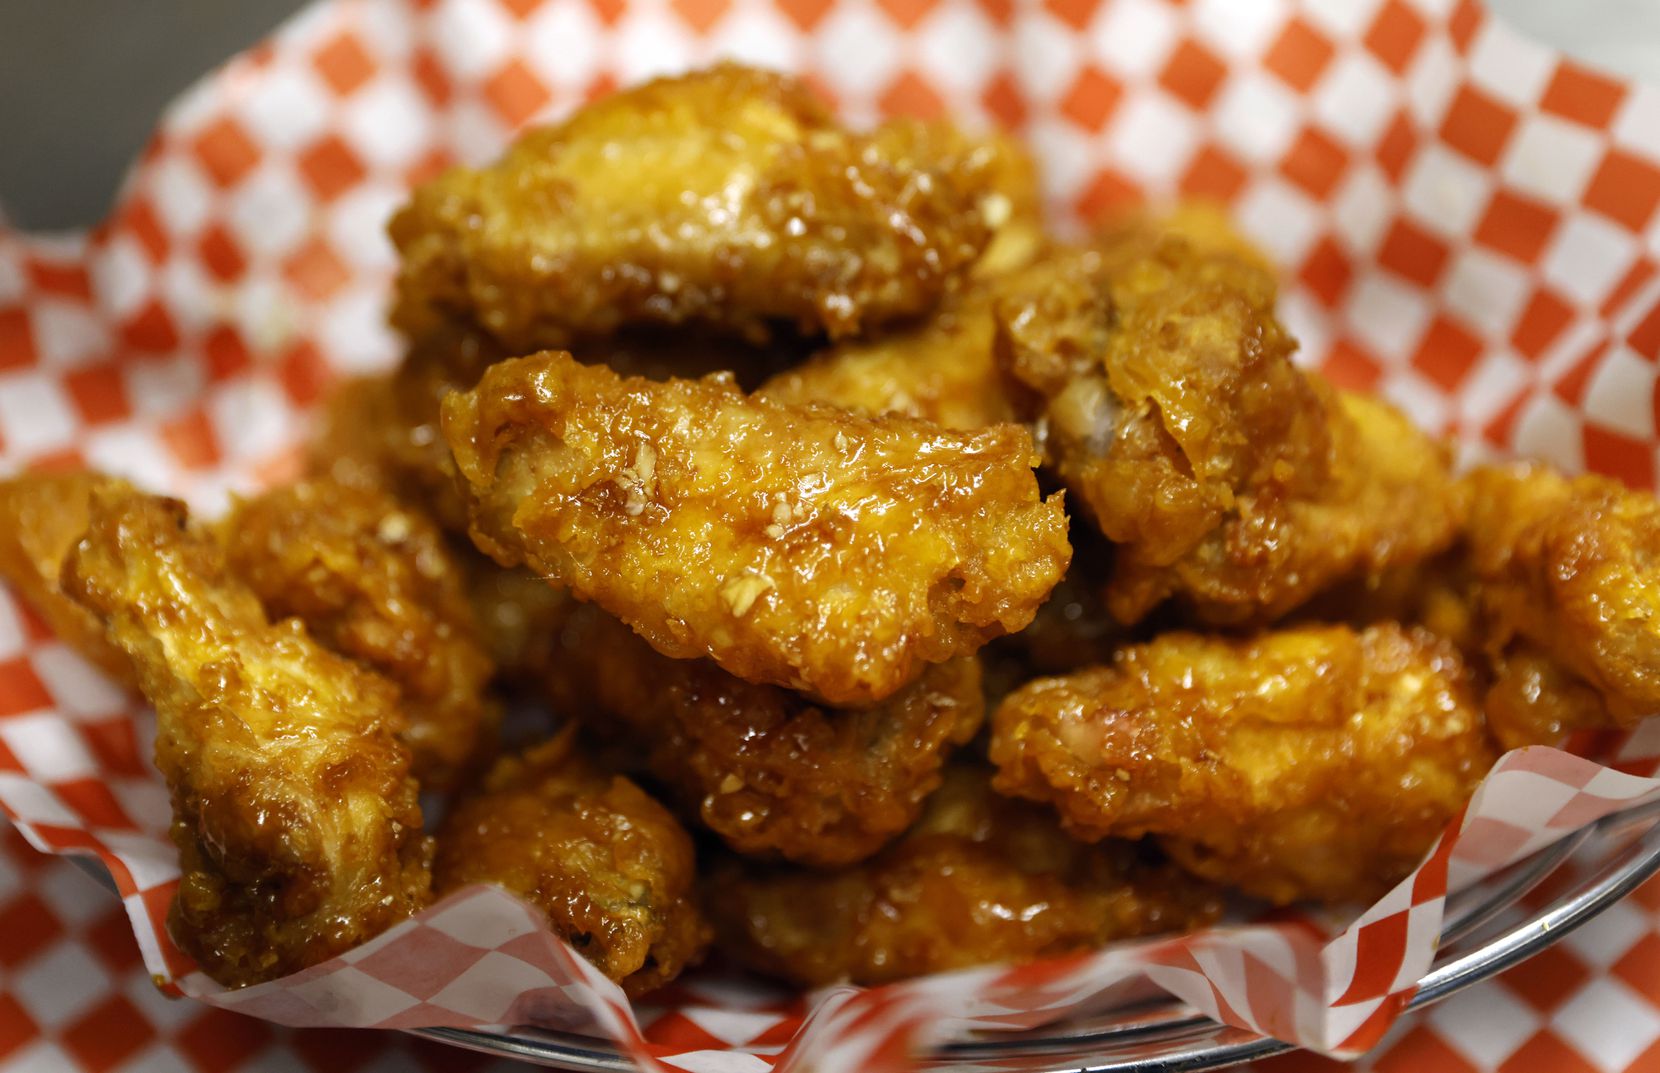 Honey garlic is one of the chicken flavors you'll find at BB.Q Chicken.